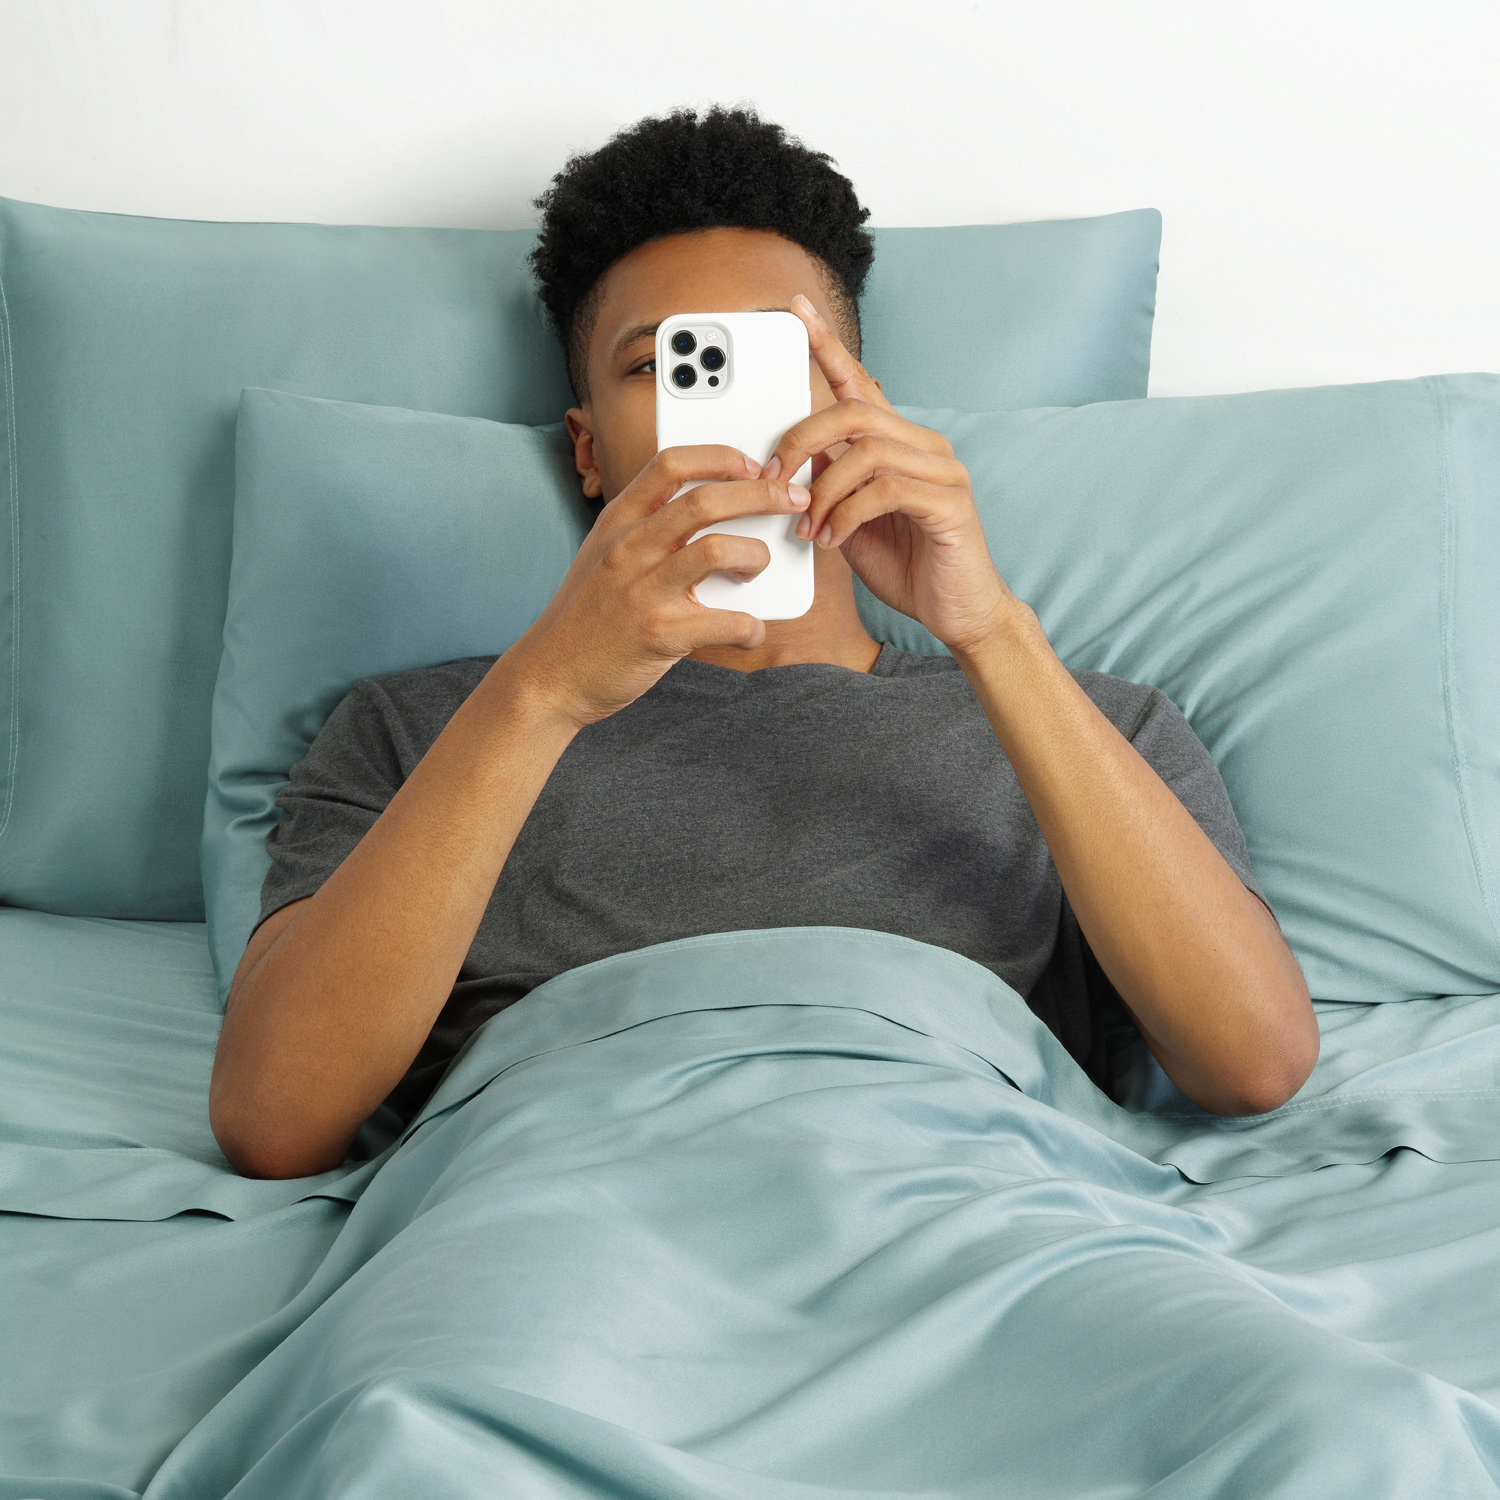 guy laying in a bed on his phone